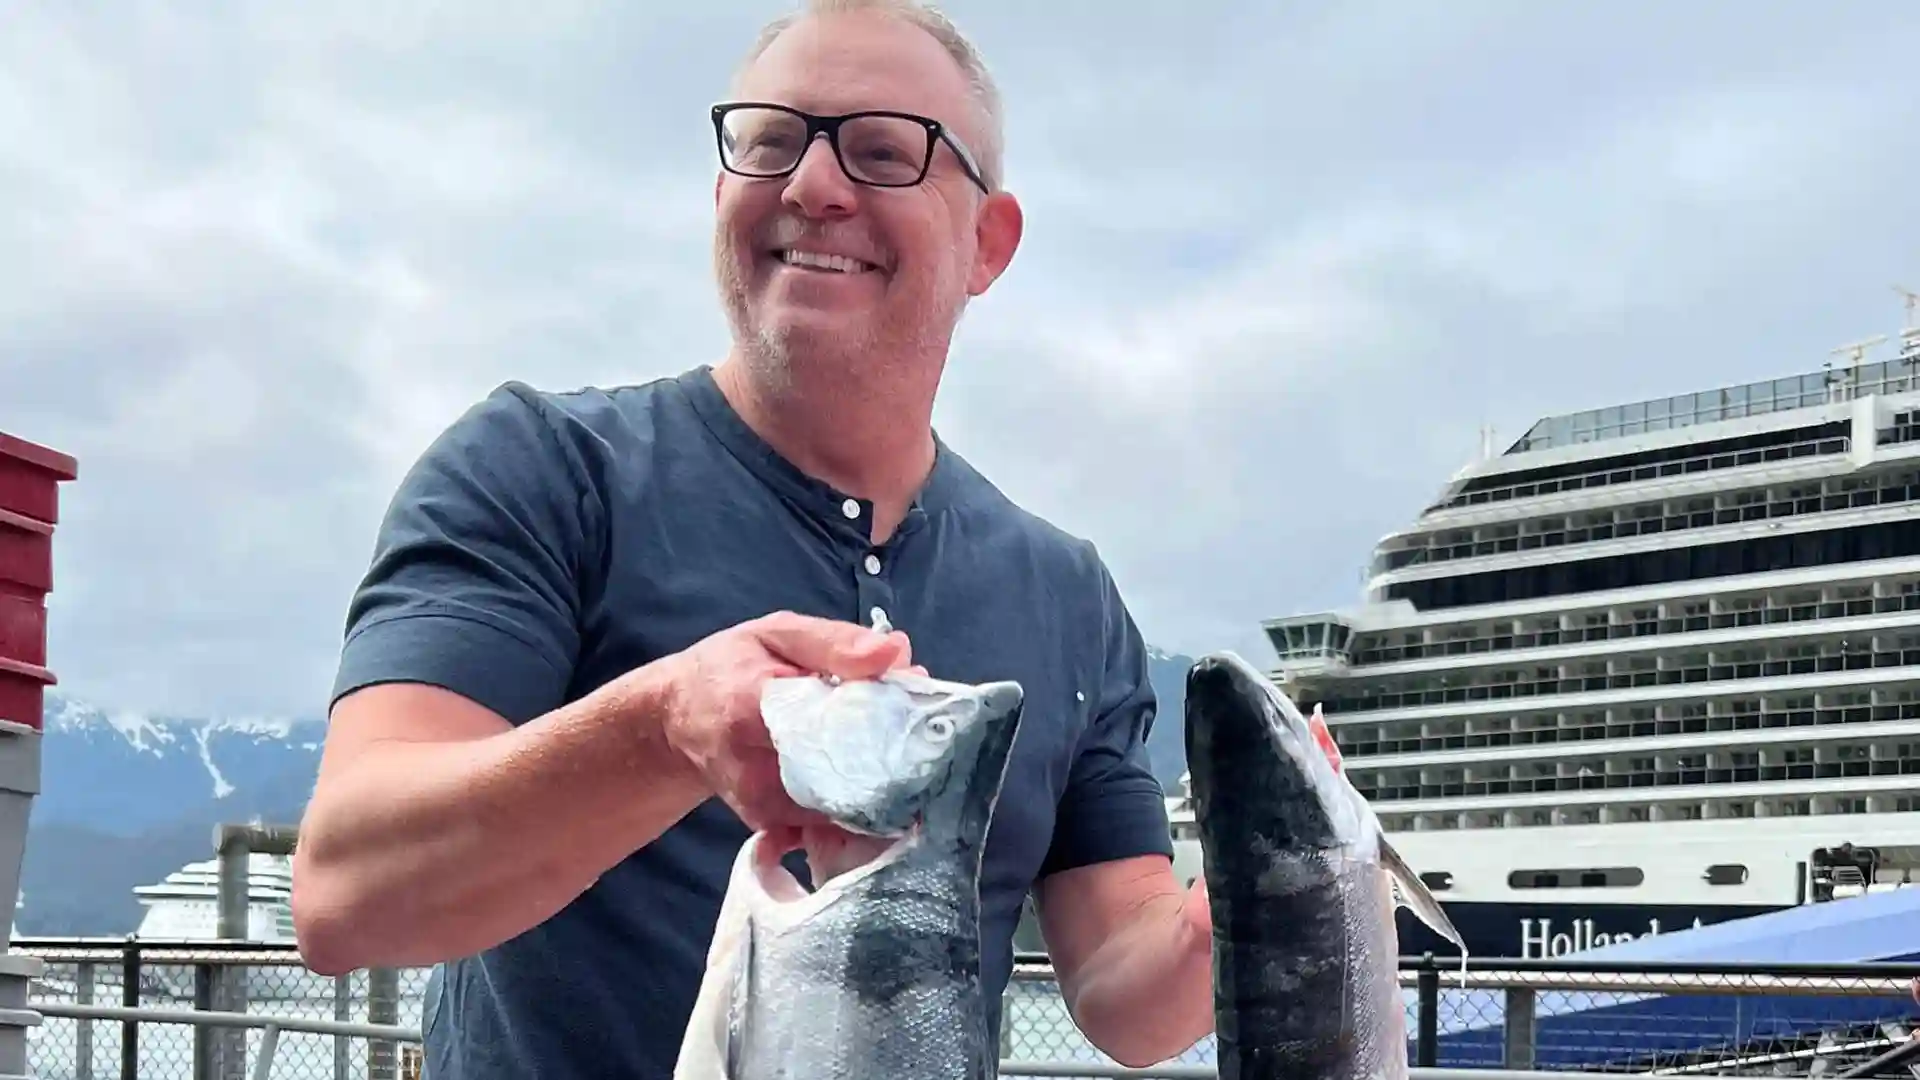 Person holding fresh caught fish in front of Holland America Line cruise ship.